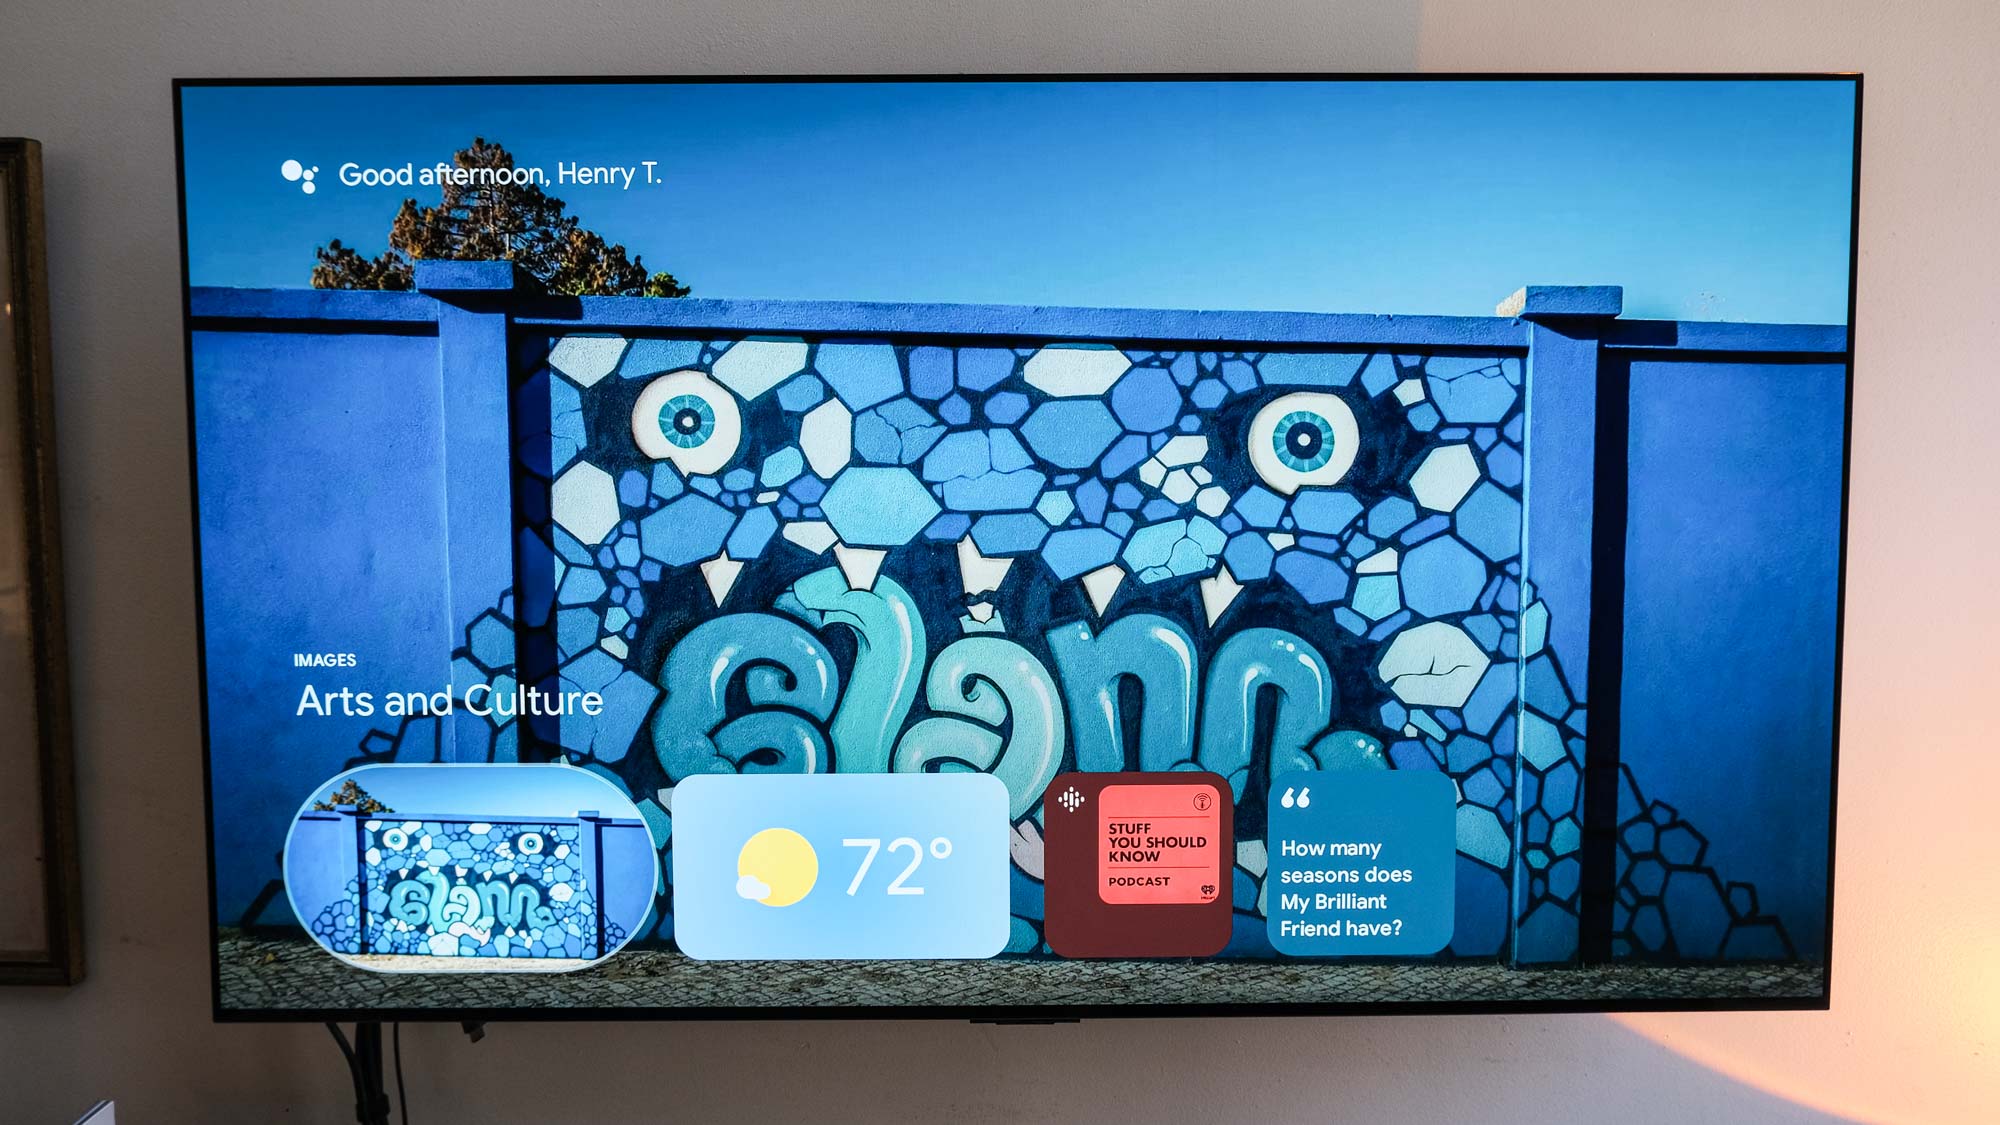 The Google TV streaming box 4K screensaver on the TV screen features elaborate rock monsters graffiti on the wall